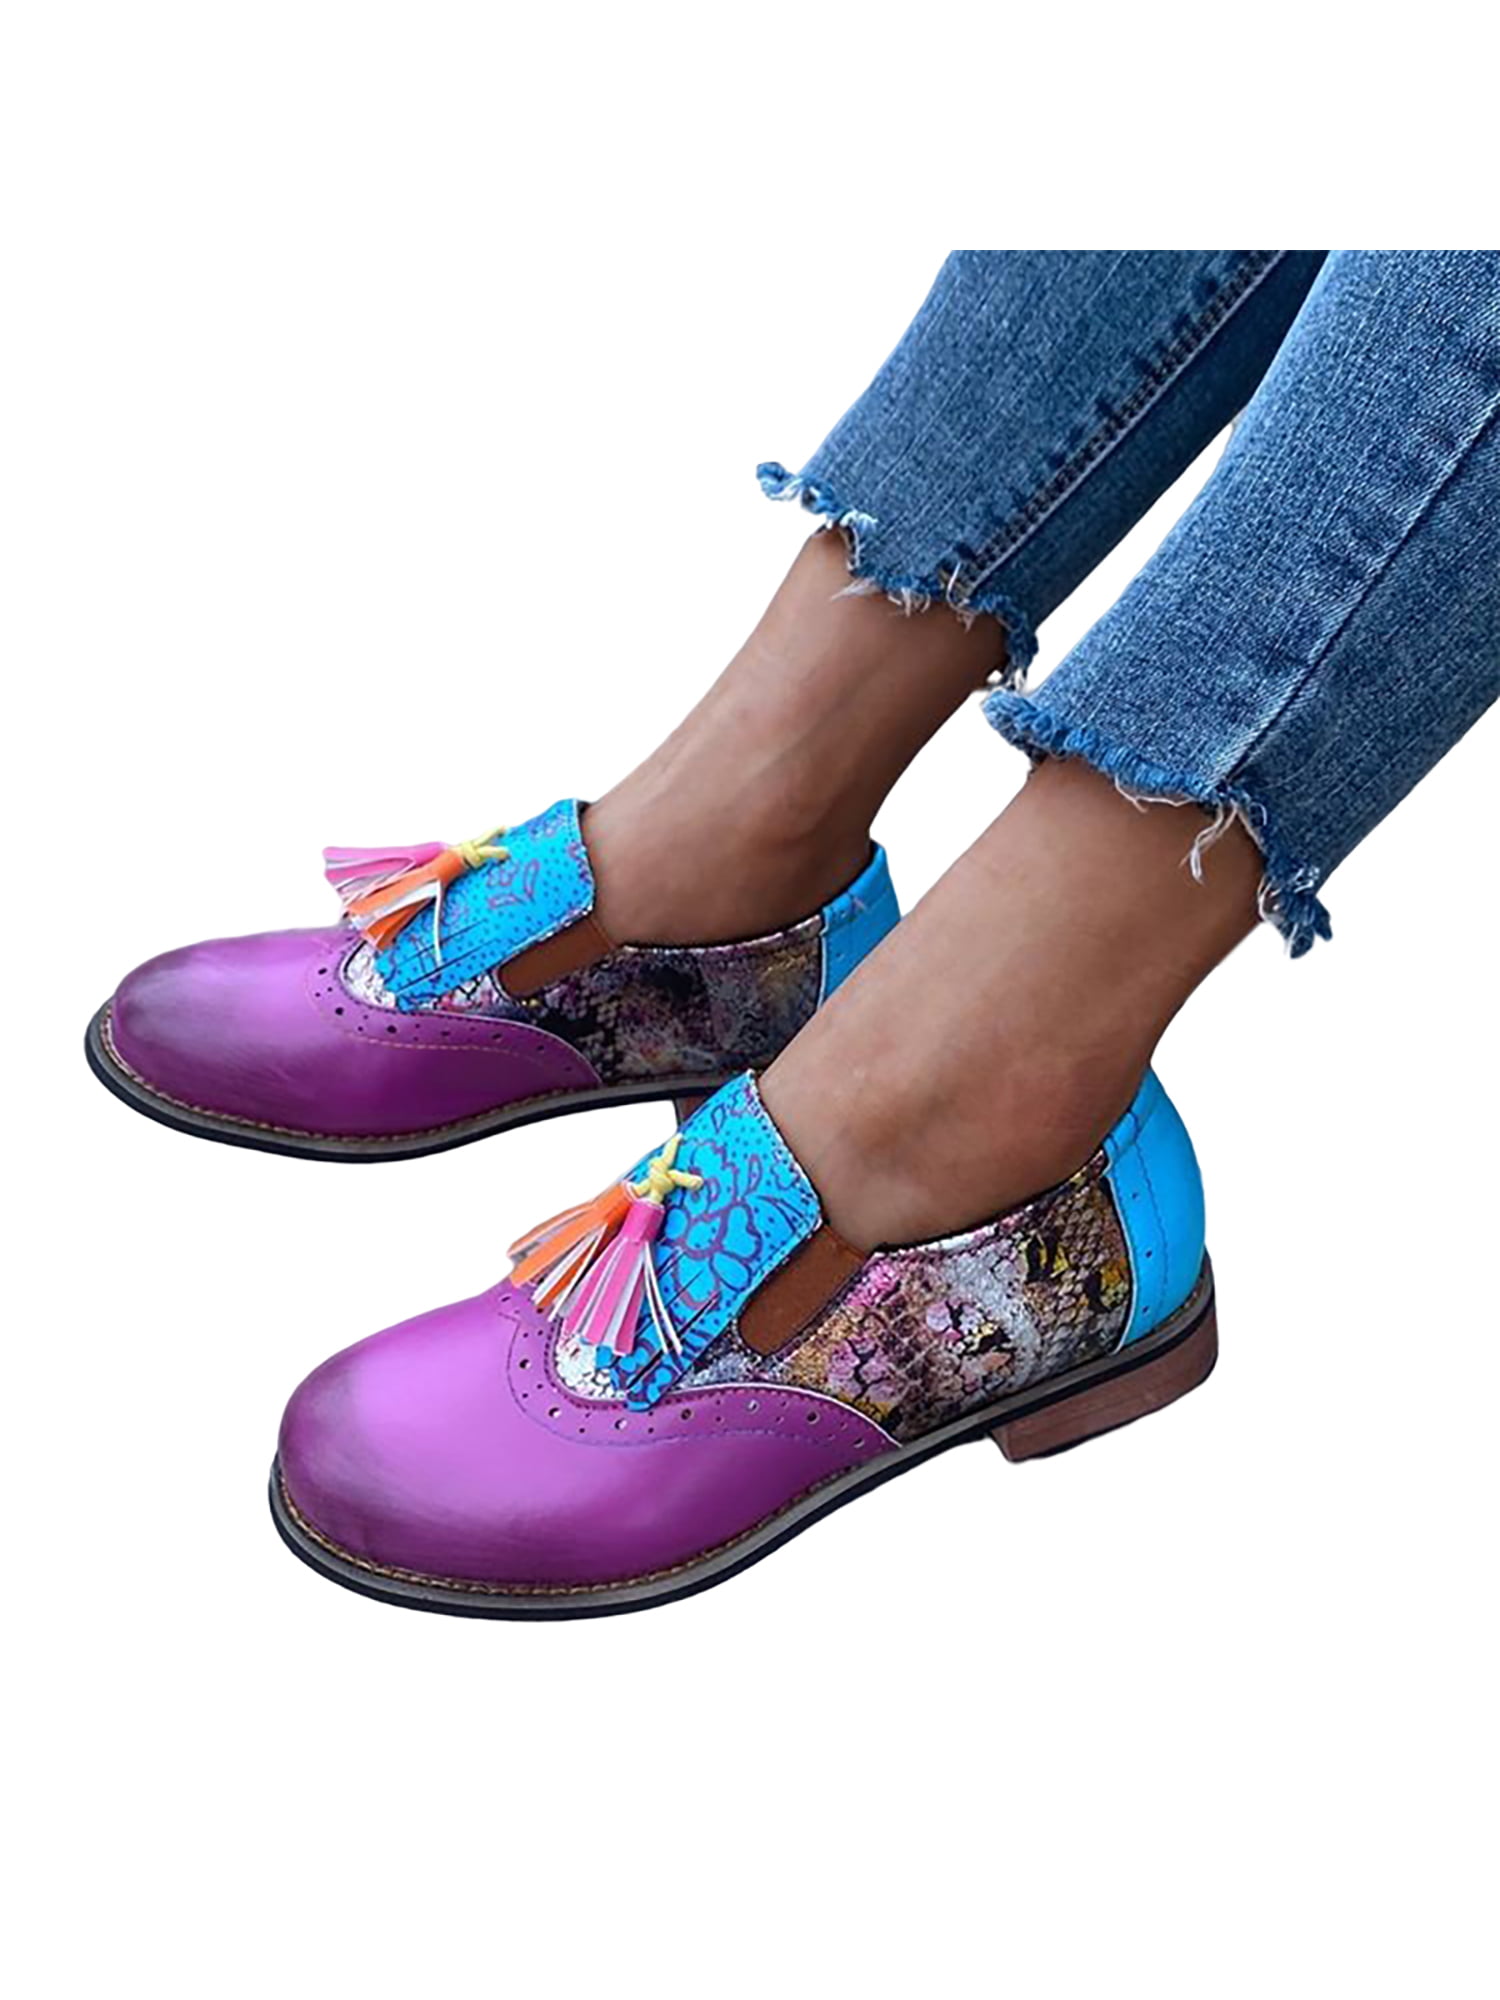 Ladies Summer Slip On Closed Toe Loafer Flat Sandals Vintage Handmade Flower Oxford Holiday Beach Walking Slipper Shoes gracosy Leather Mules for Women